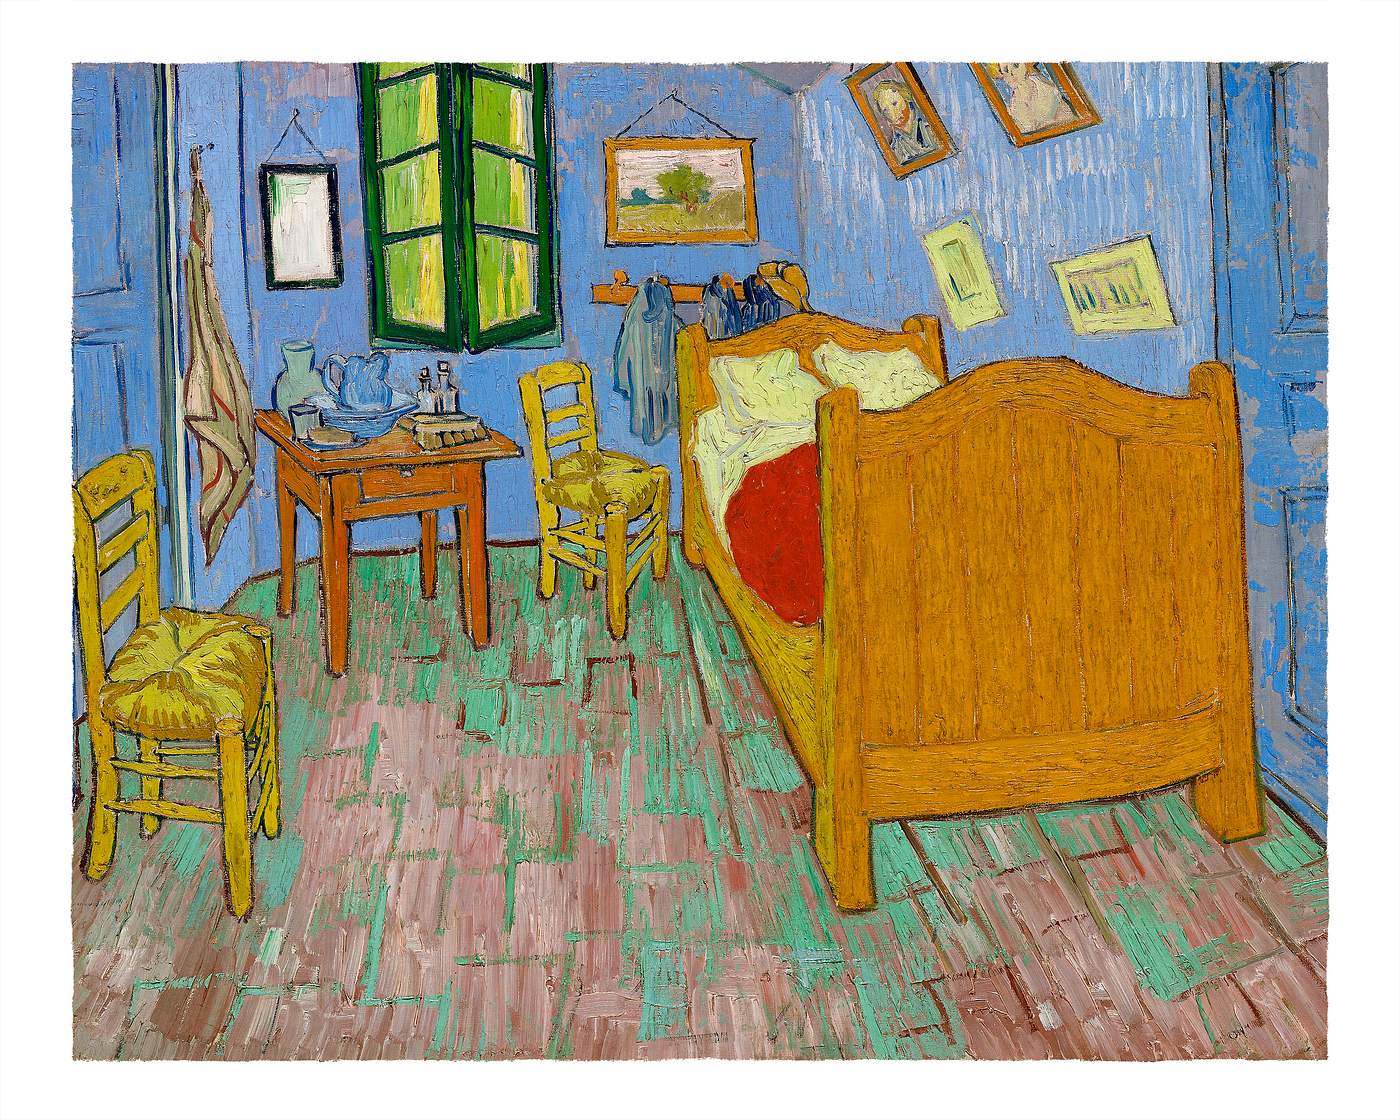 The Bedroom illustration wall art print and poster. Original by Vincent van Gogh, digitally enhanced by rawpixel.The Bedroom illustration wall art print and poster. Original by Vincent van Gogh, digitally enhanced by rawpixel.